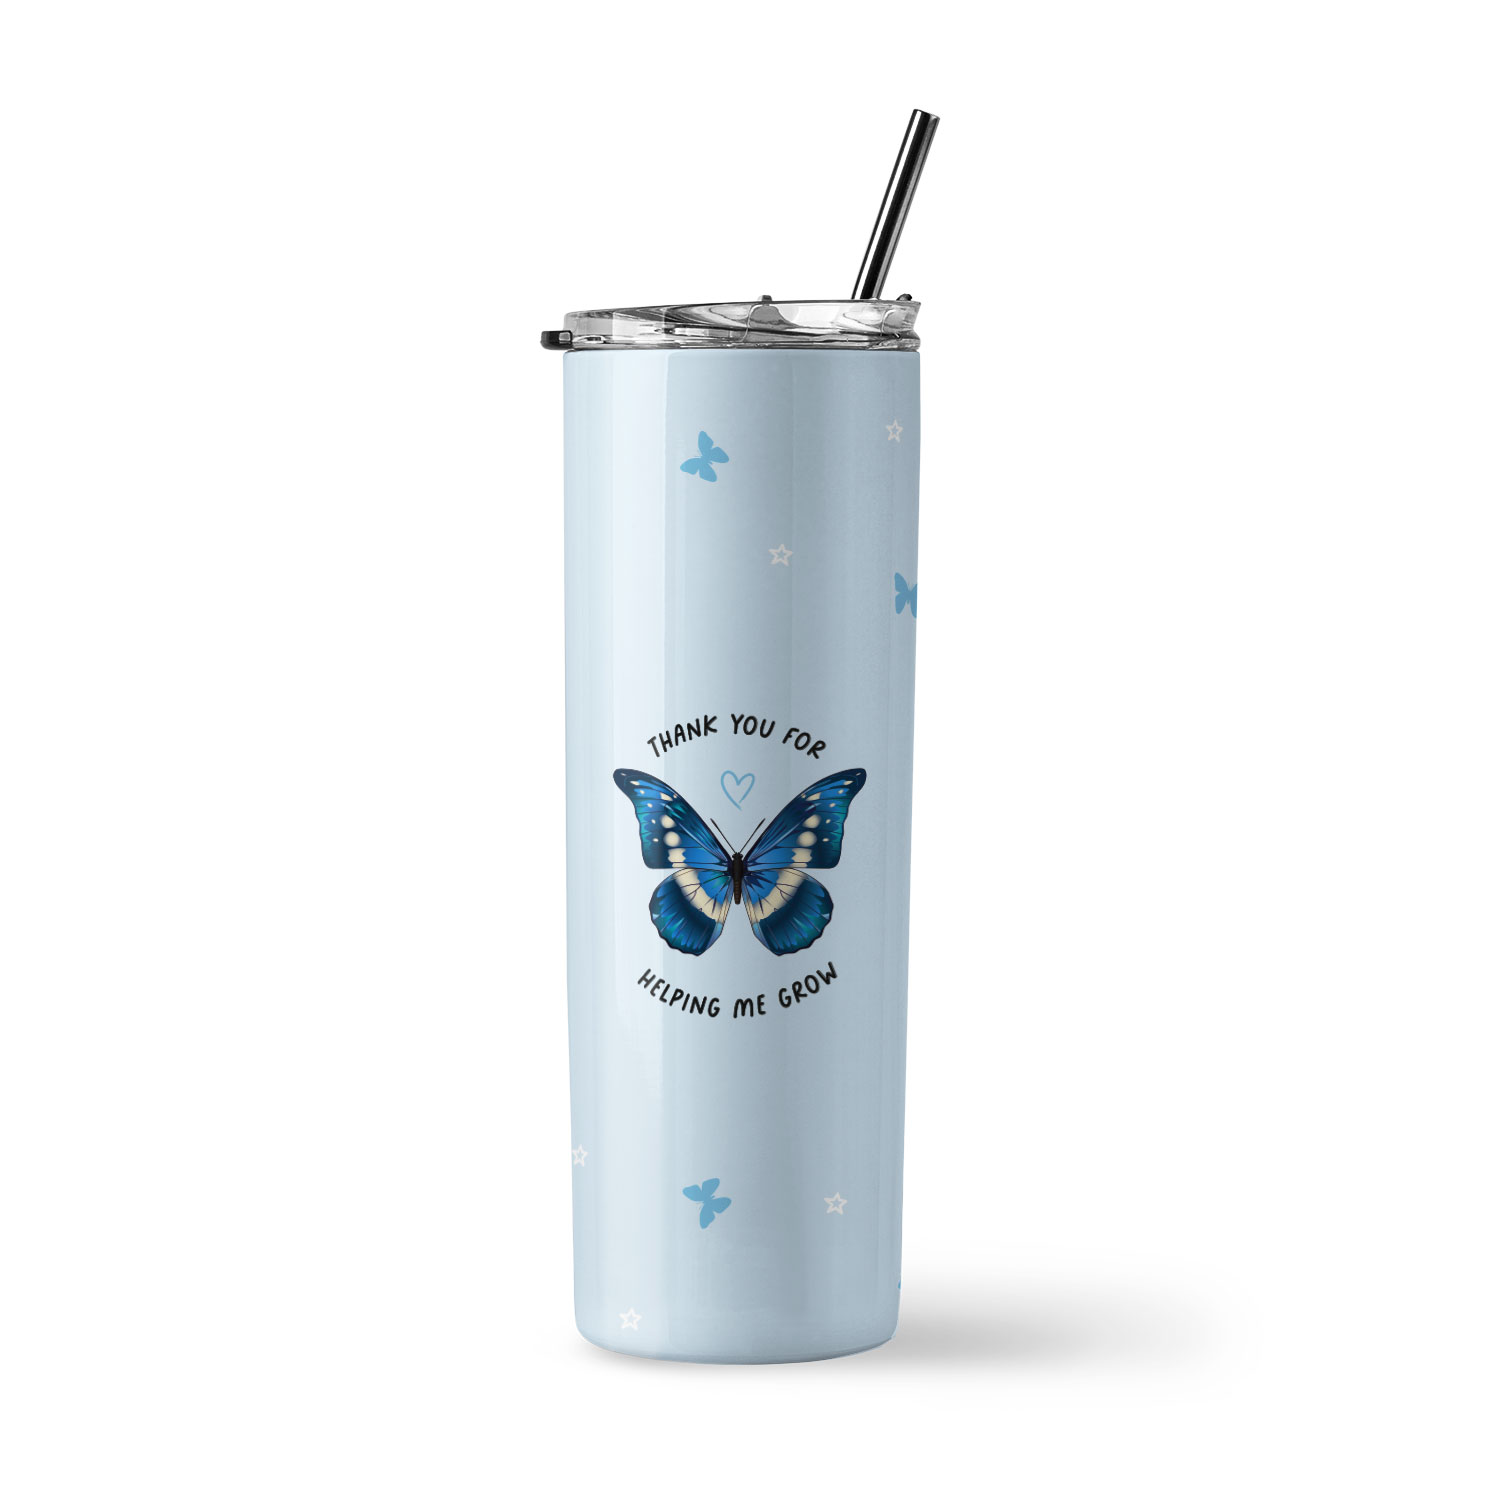 [Custom Name] Insulated Stainless Steel Tumbler - Thank You For Helping Me Grow Design